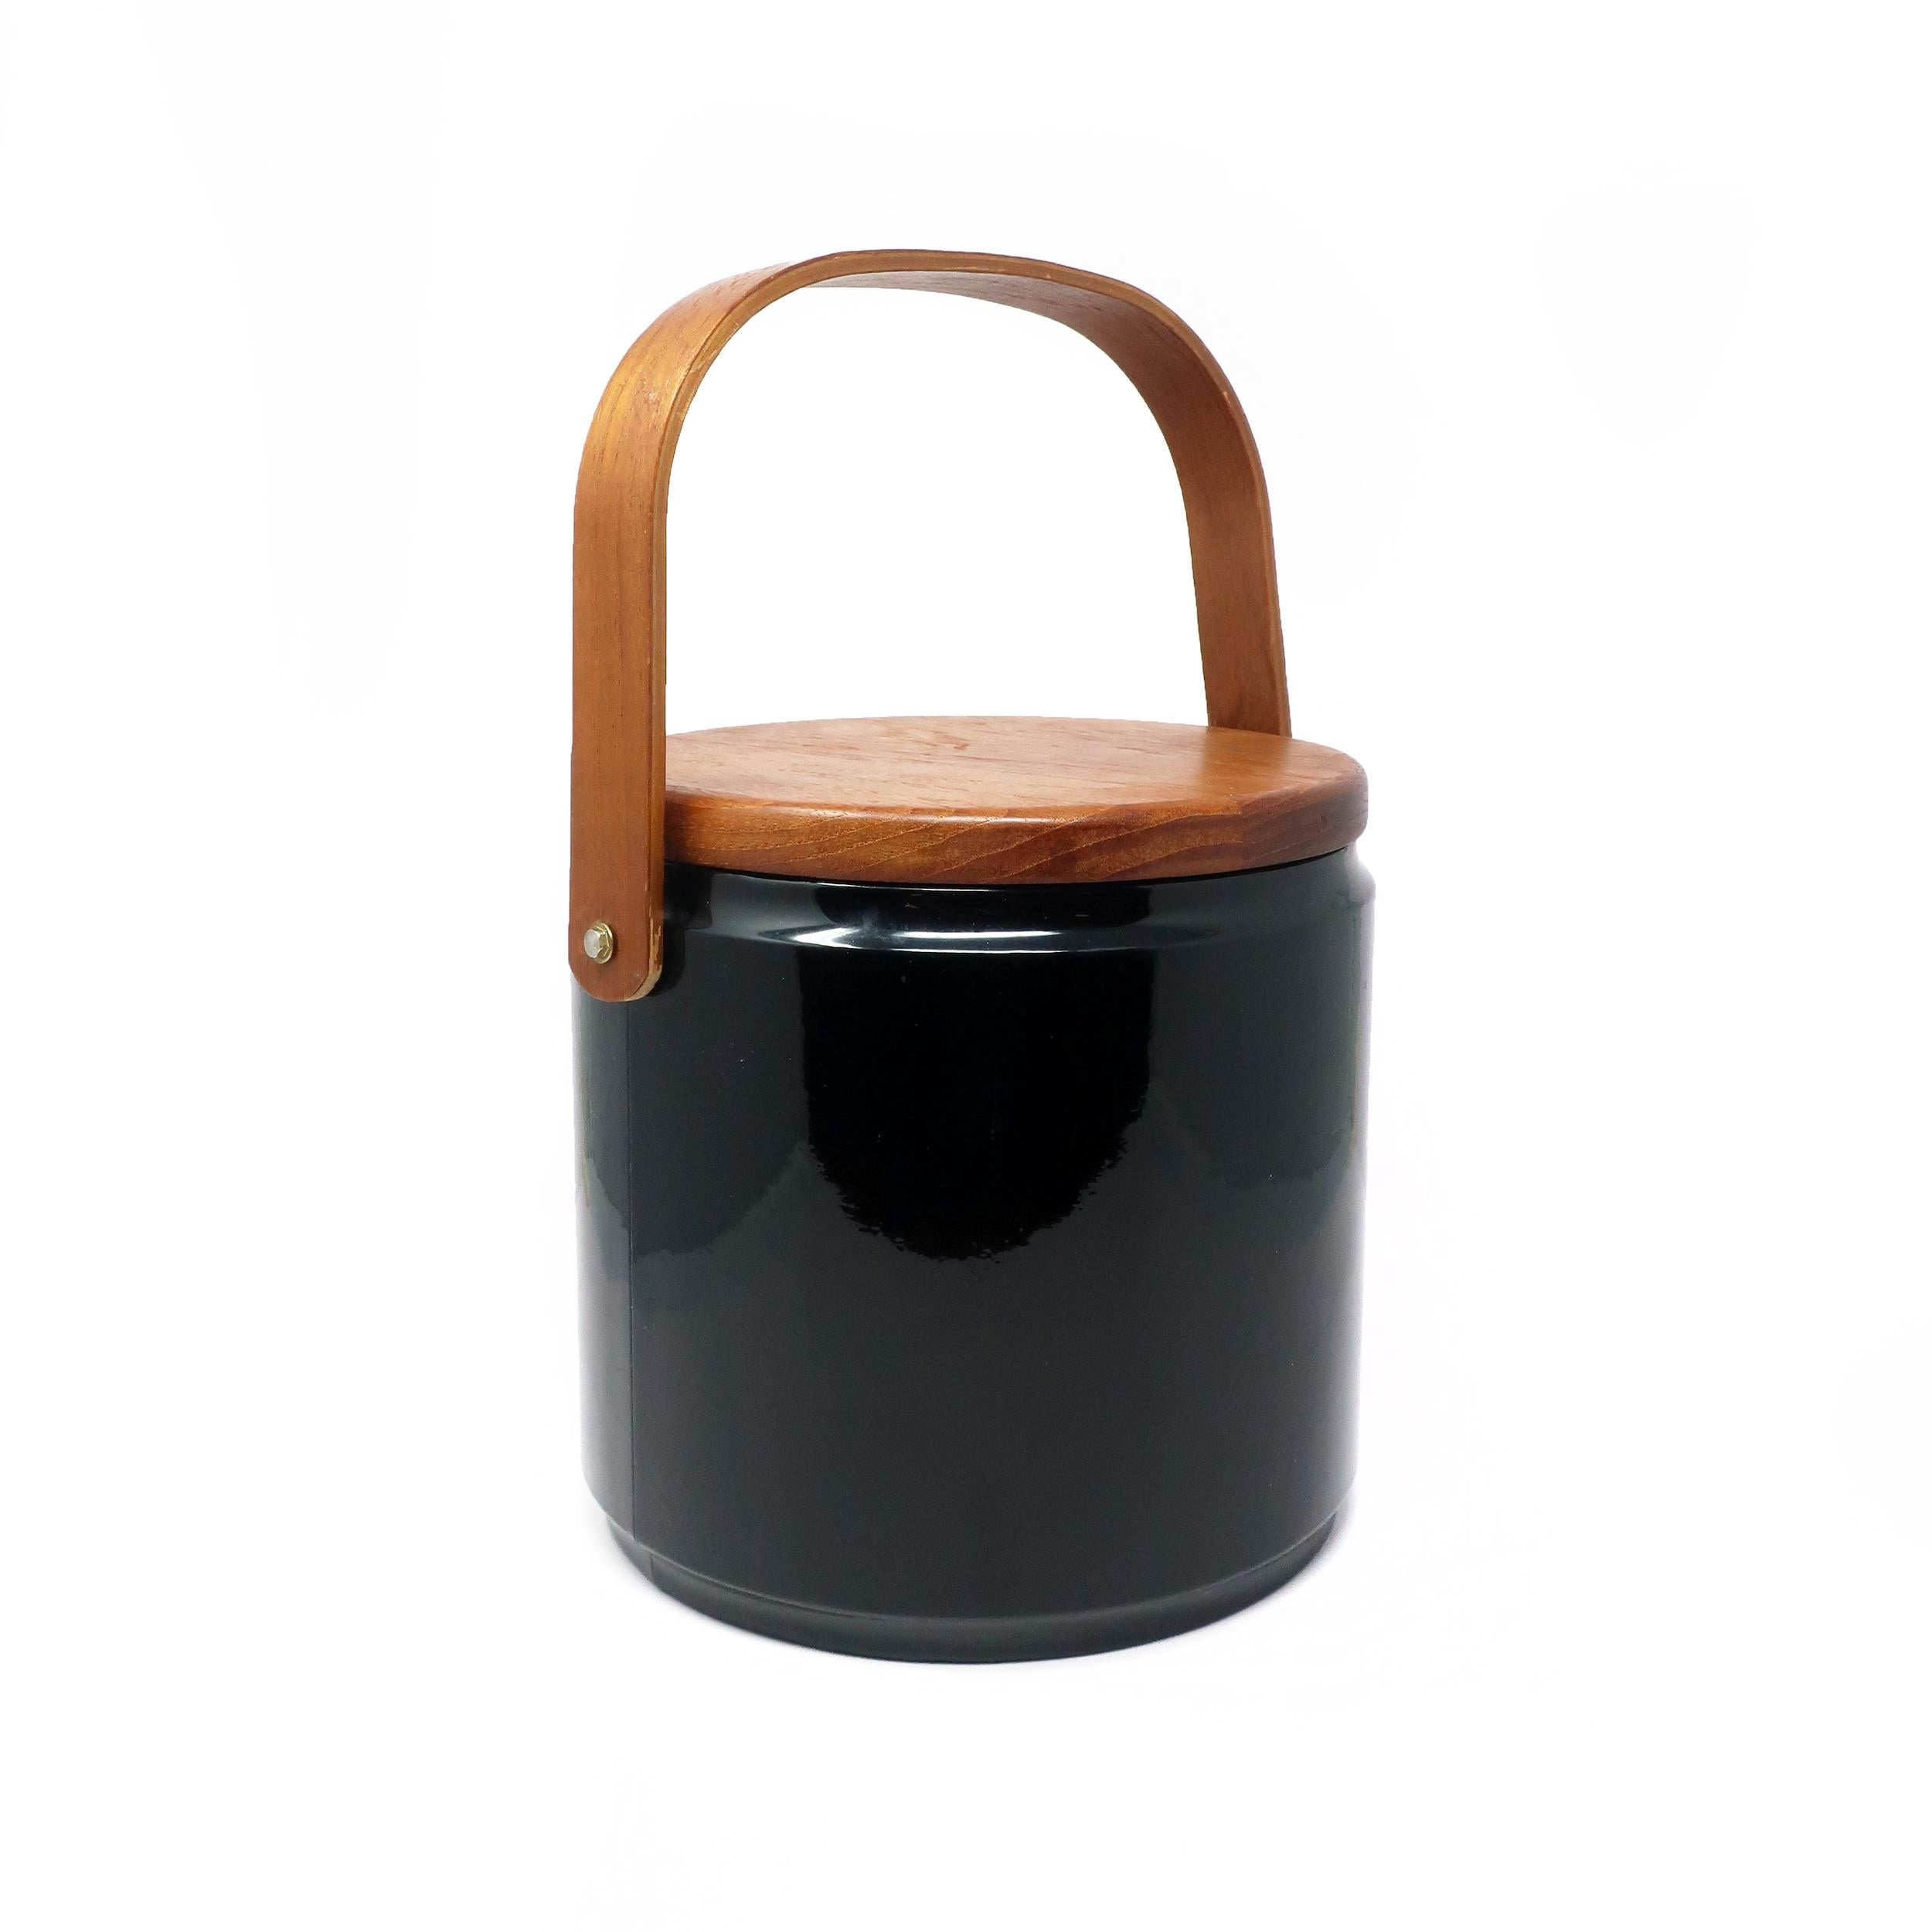 A vintage Mid-Century Modern ice bucket by Georges Briard from the 1960s/1970s with a teak handle and lid on a plastic covered bucket. In good vintage condition with few signs of use, including a slight curve to the handle. Signed on underside of